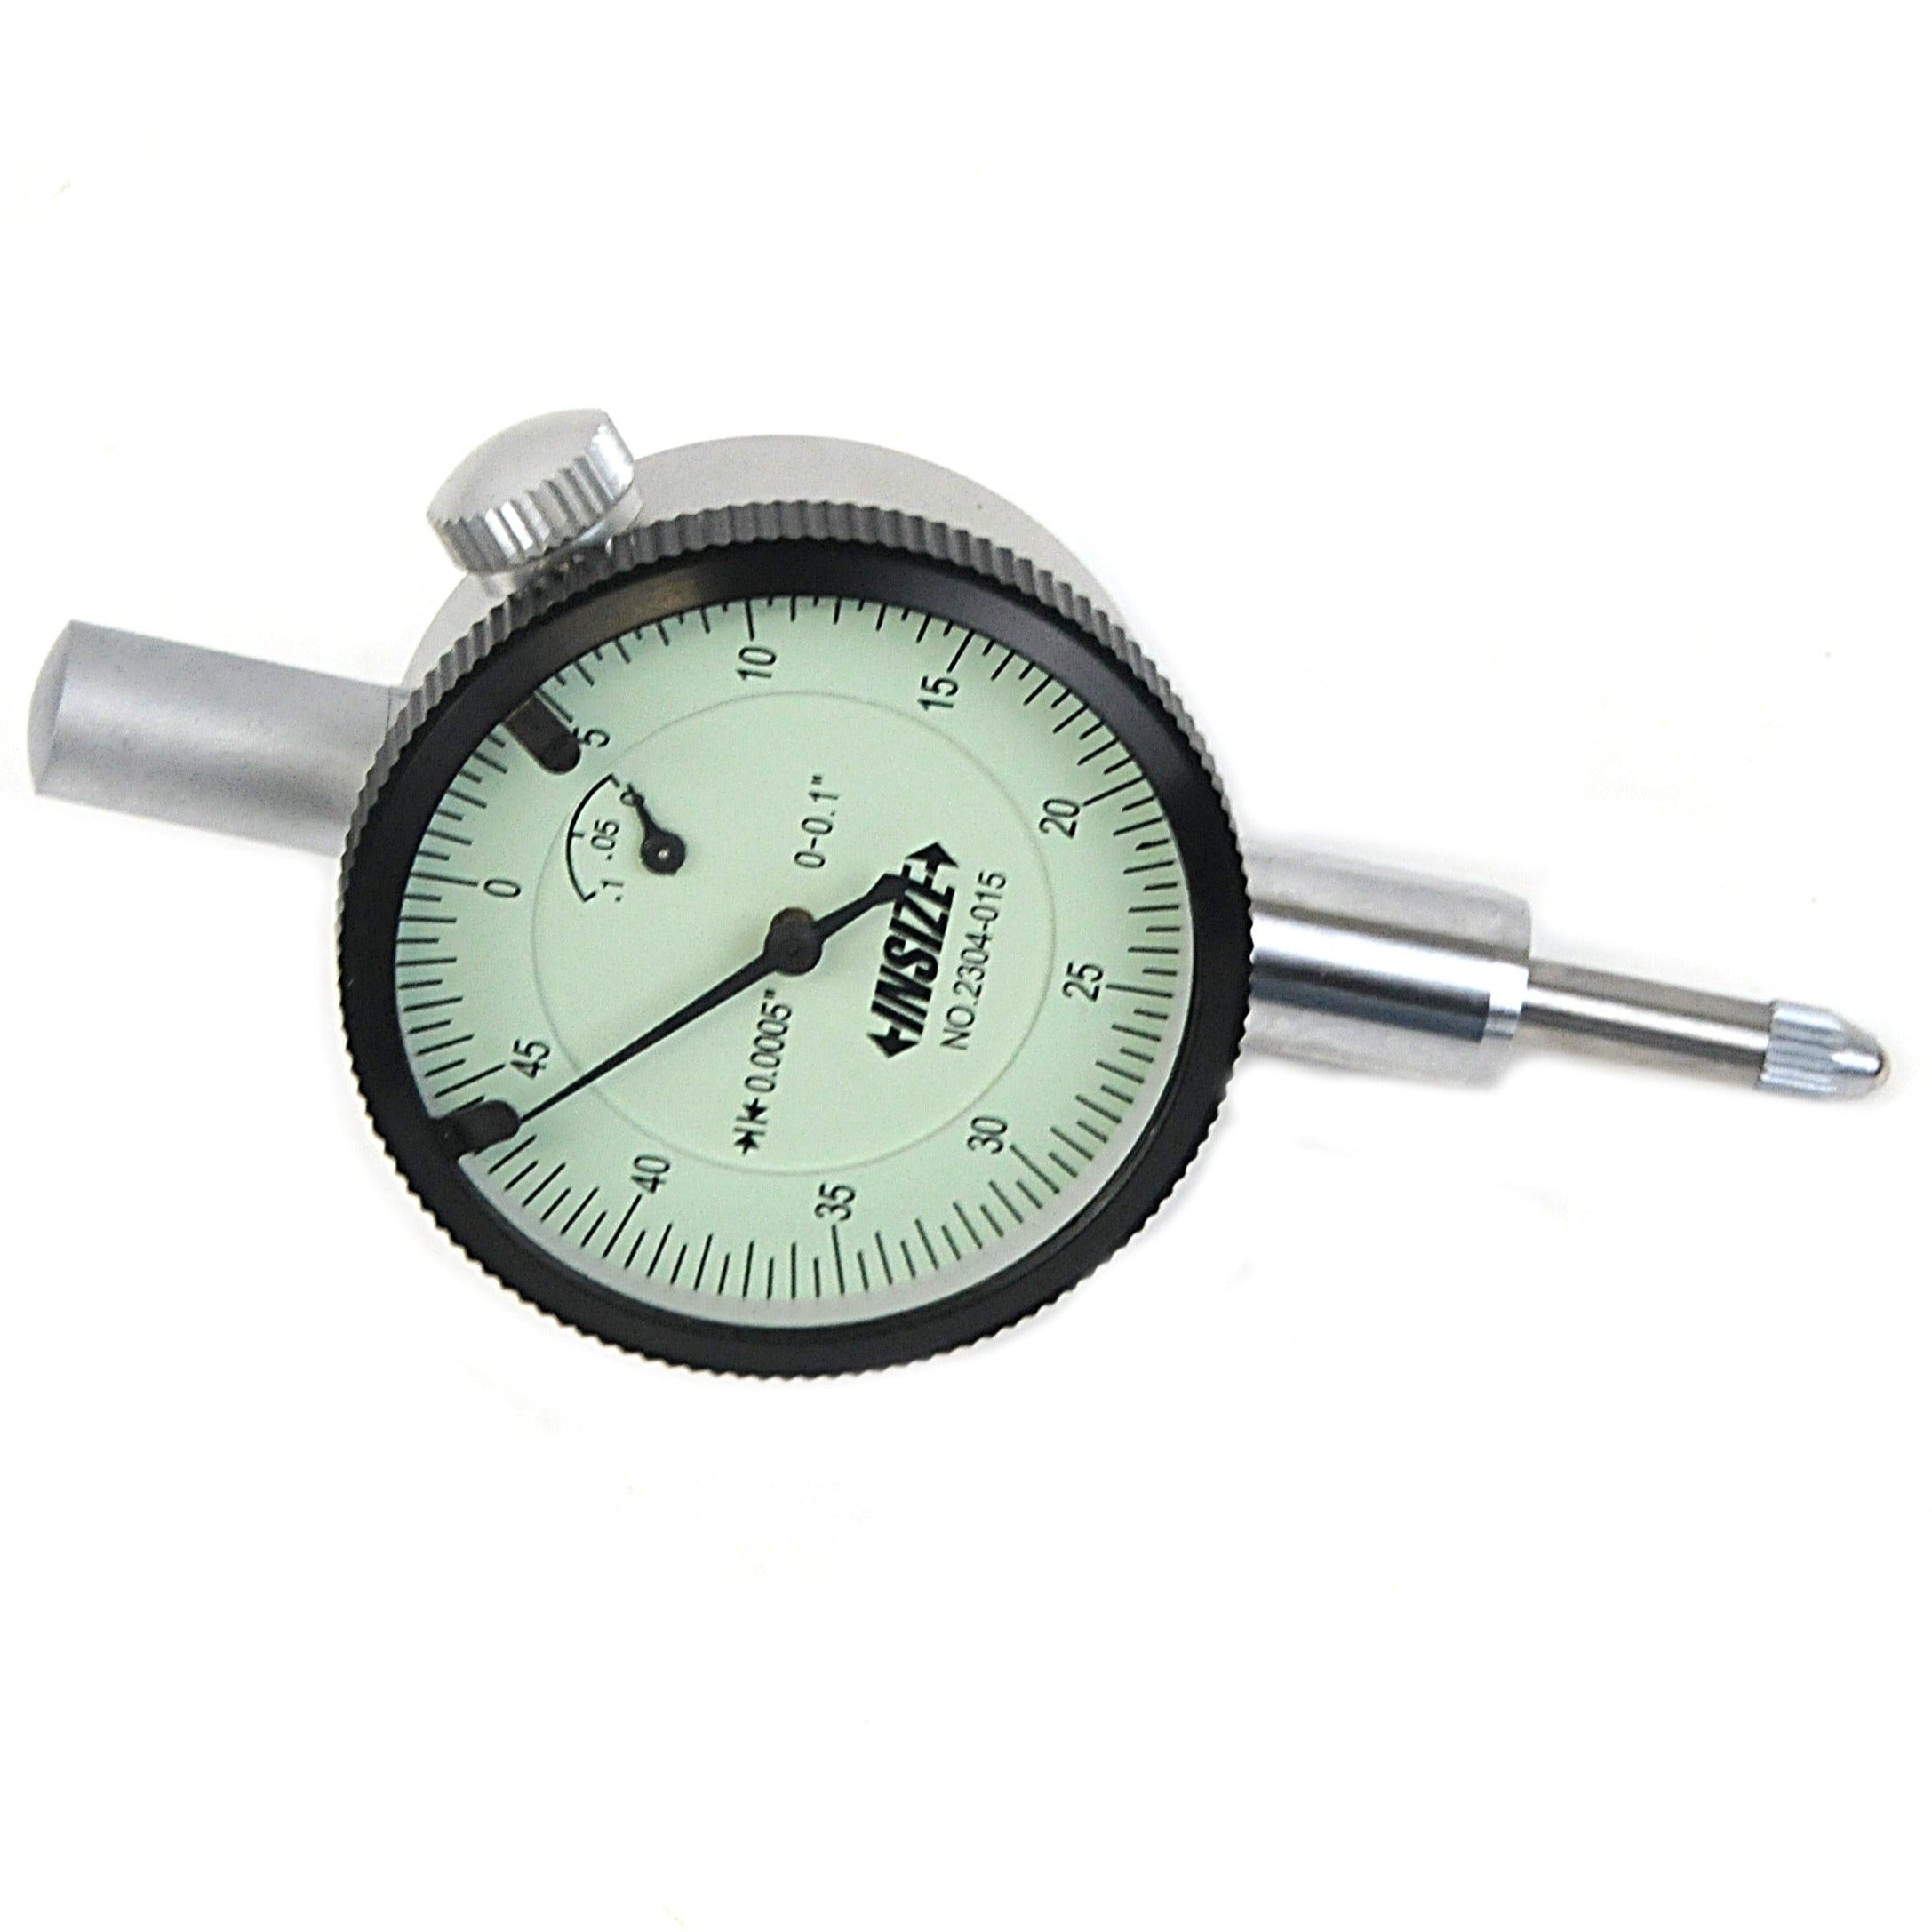 Insize Imperial Compact Dial Indicator 0.1" 2304-015